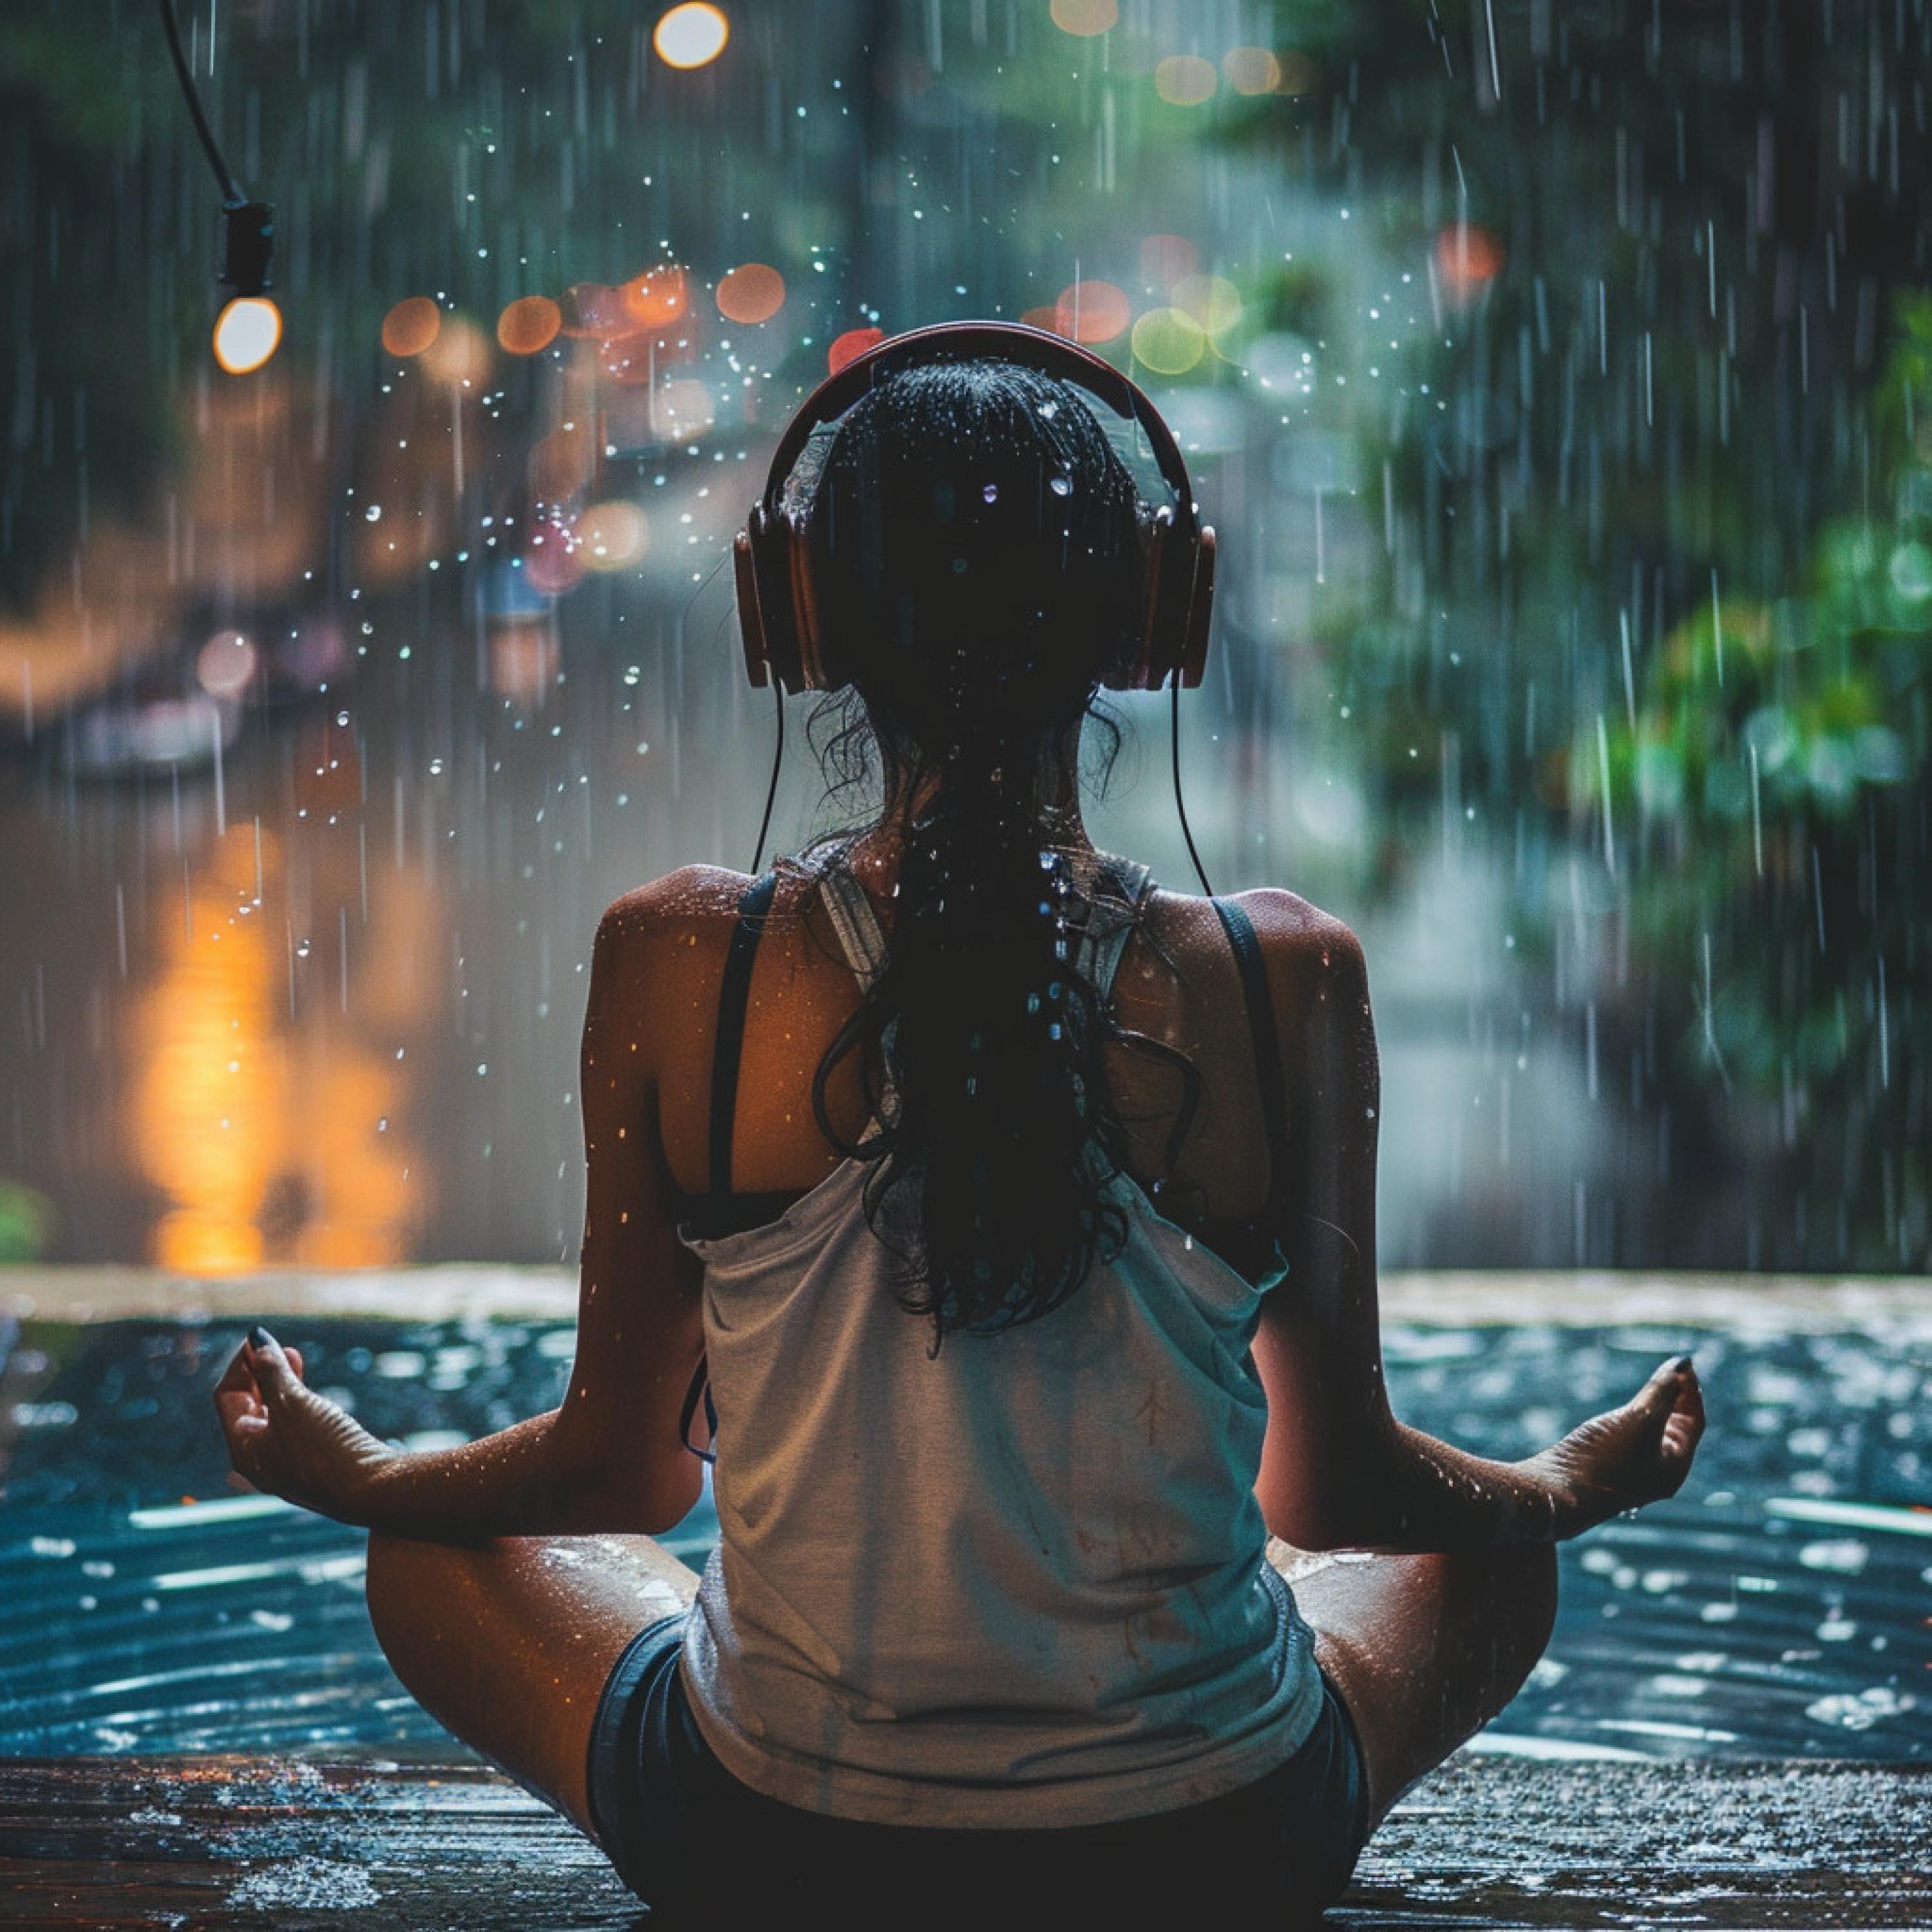 The Yoga Mantra and Chant Music Project - Rain's Mindful Stretch